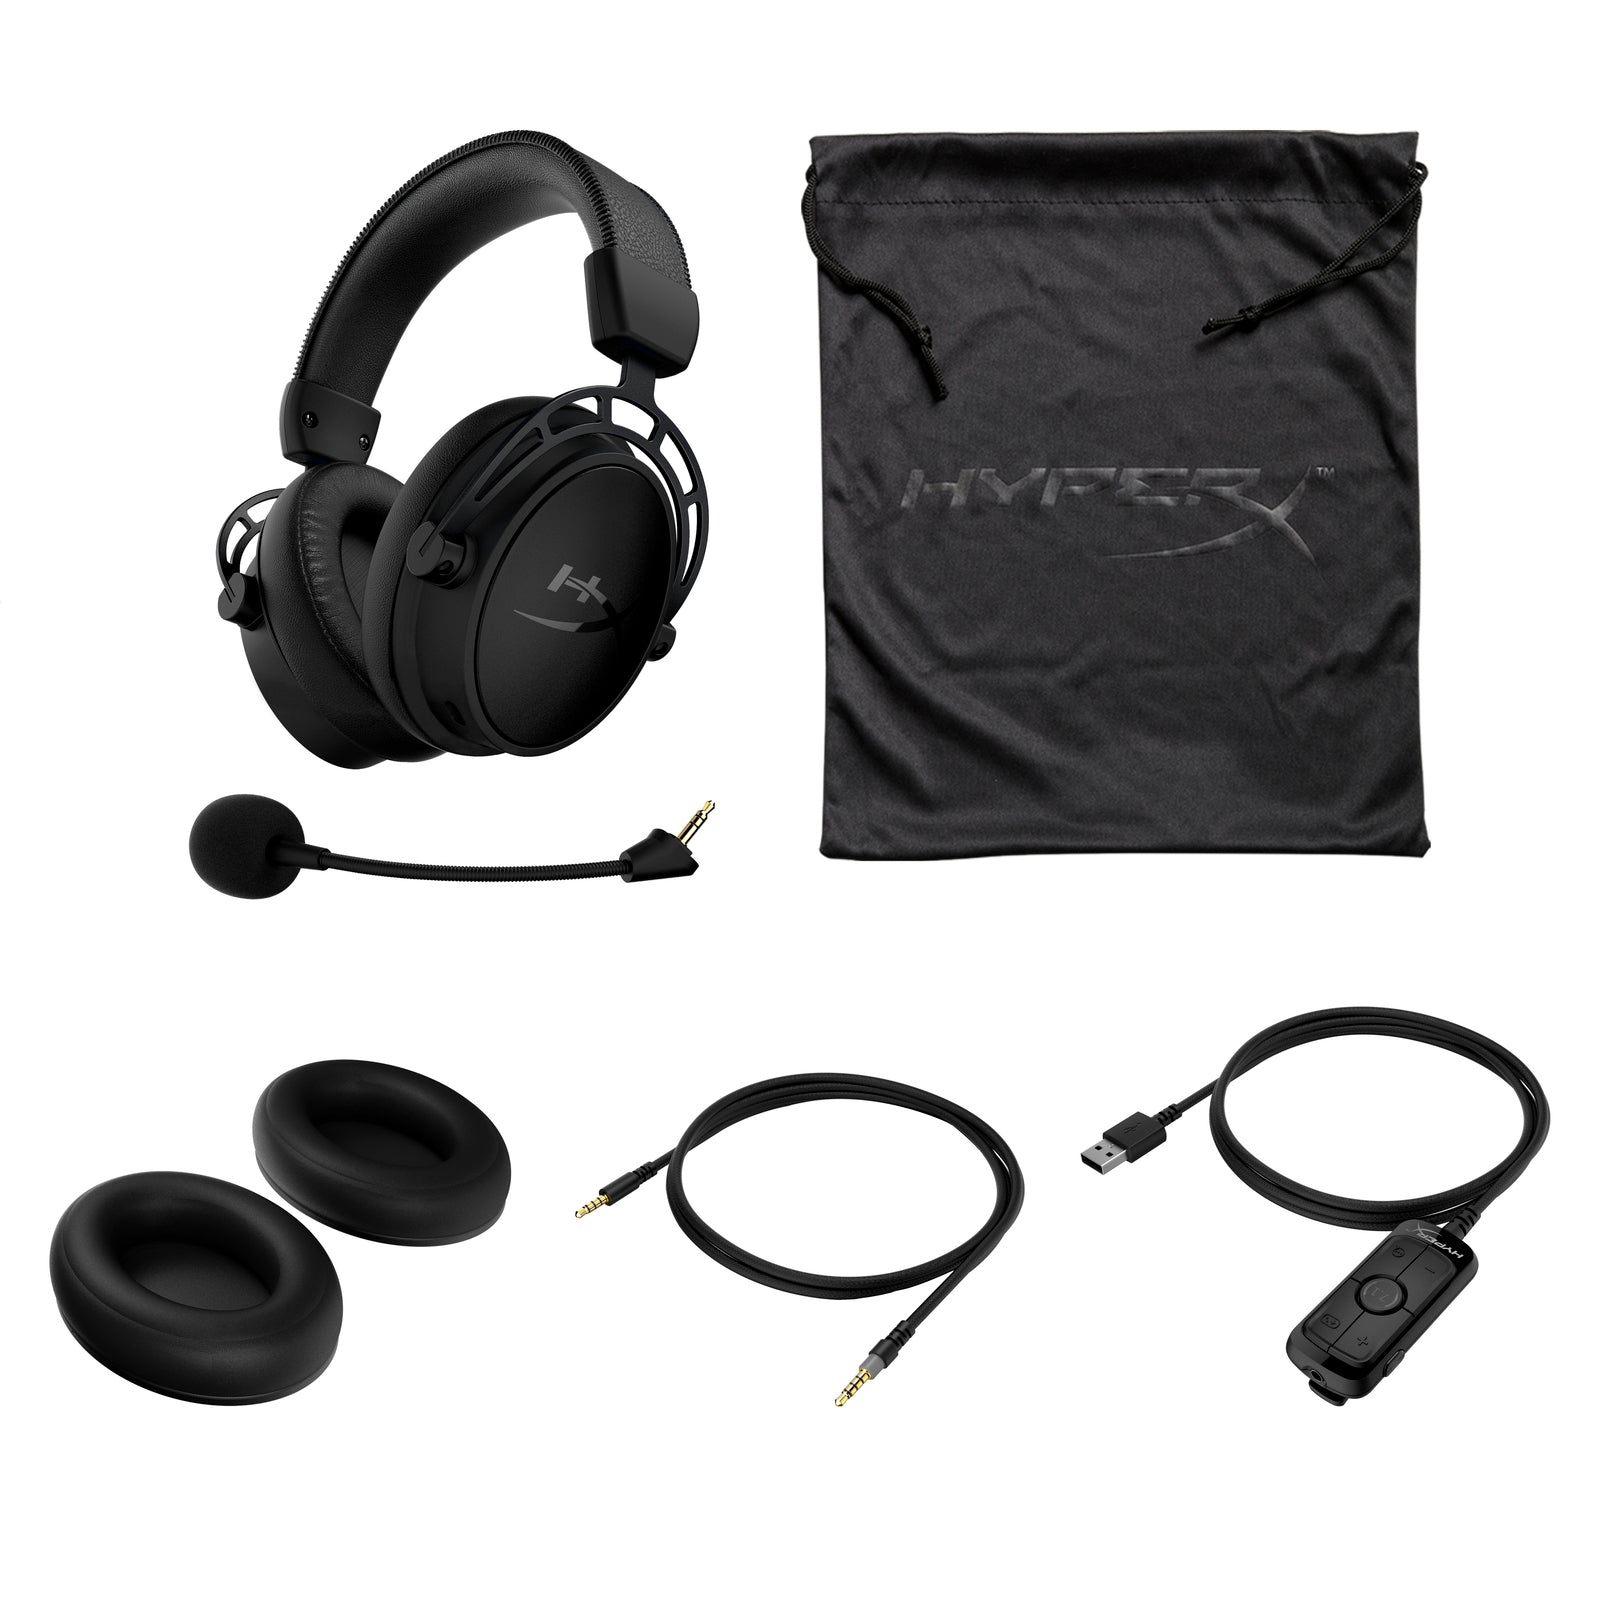 HyperX Cloud Alpha S Black Gaming headset displaying different parts such as the attachable microphone, mesh bag, cushion pads, extension audio cable and usb sound card